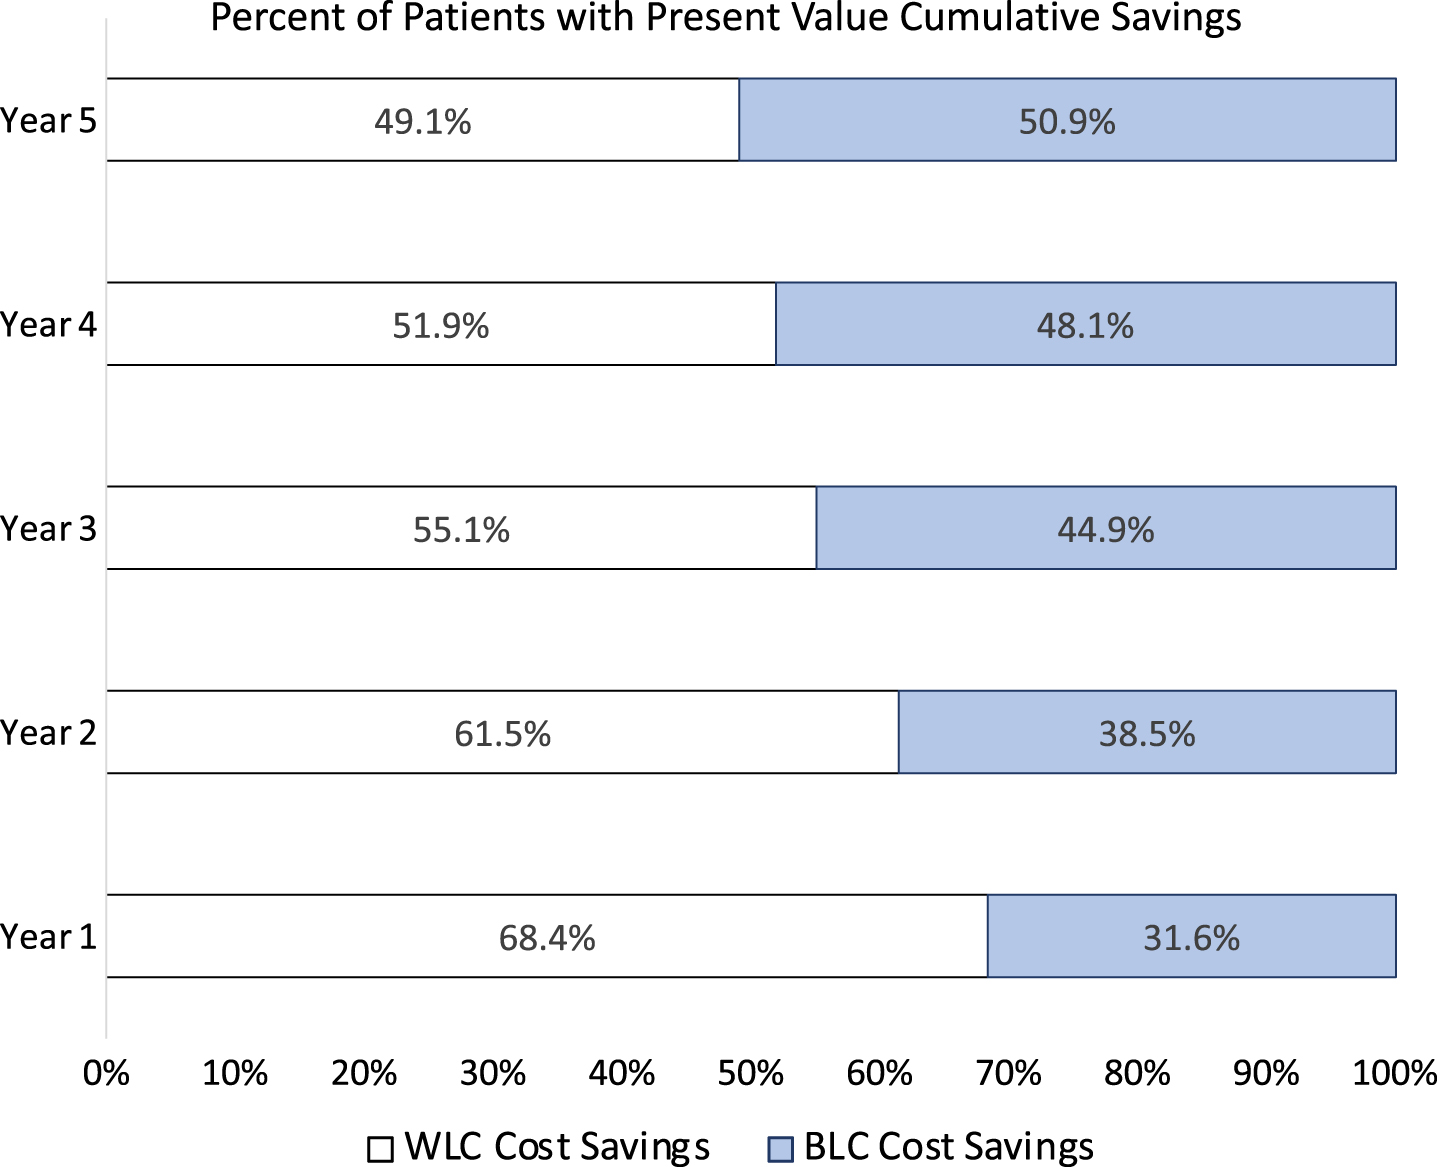 Percent Patient Savings. The percentage of patients (WLC versus BLC cohorts) with cumulative savings. All value discounted to 2021 present-day United States Dollars at 3% APR. BLC = Blue light cystoscopy with hexaminolevulinate; WLC = White light cystoscopy.